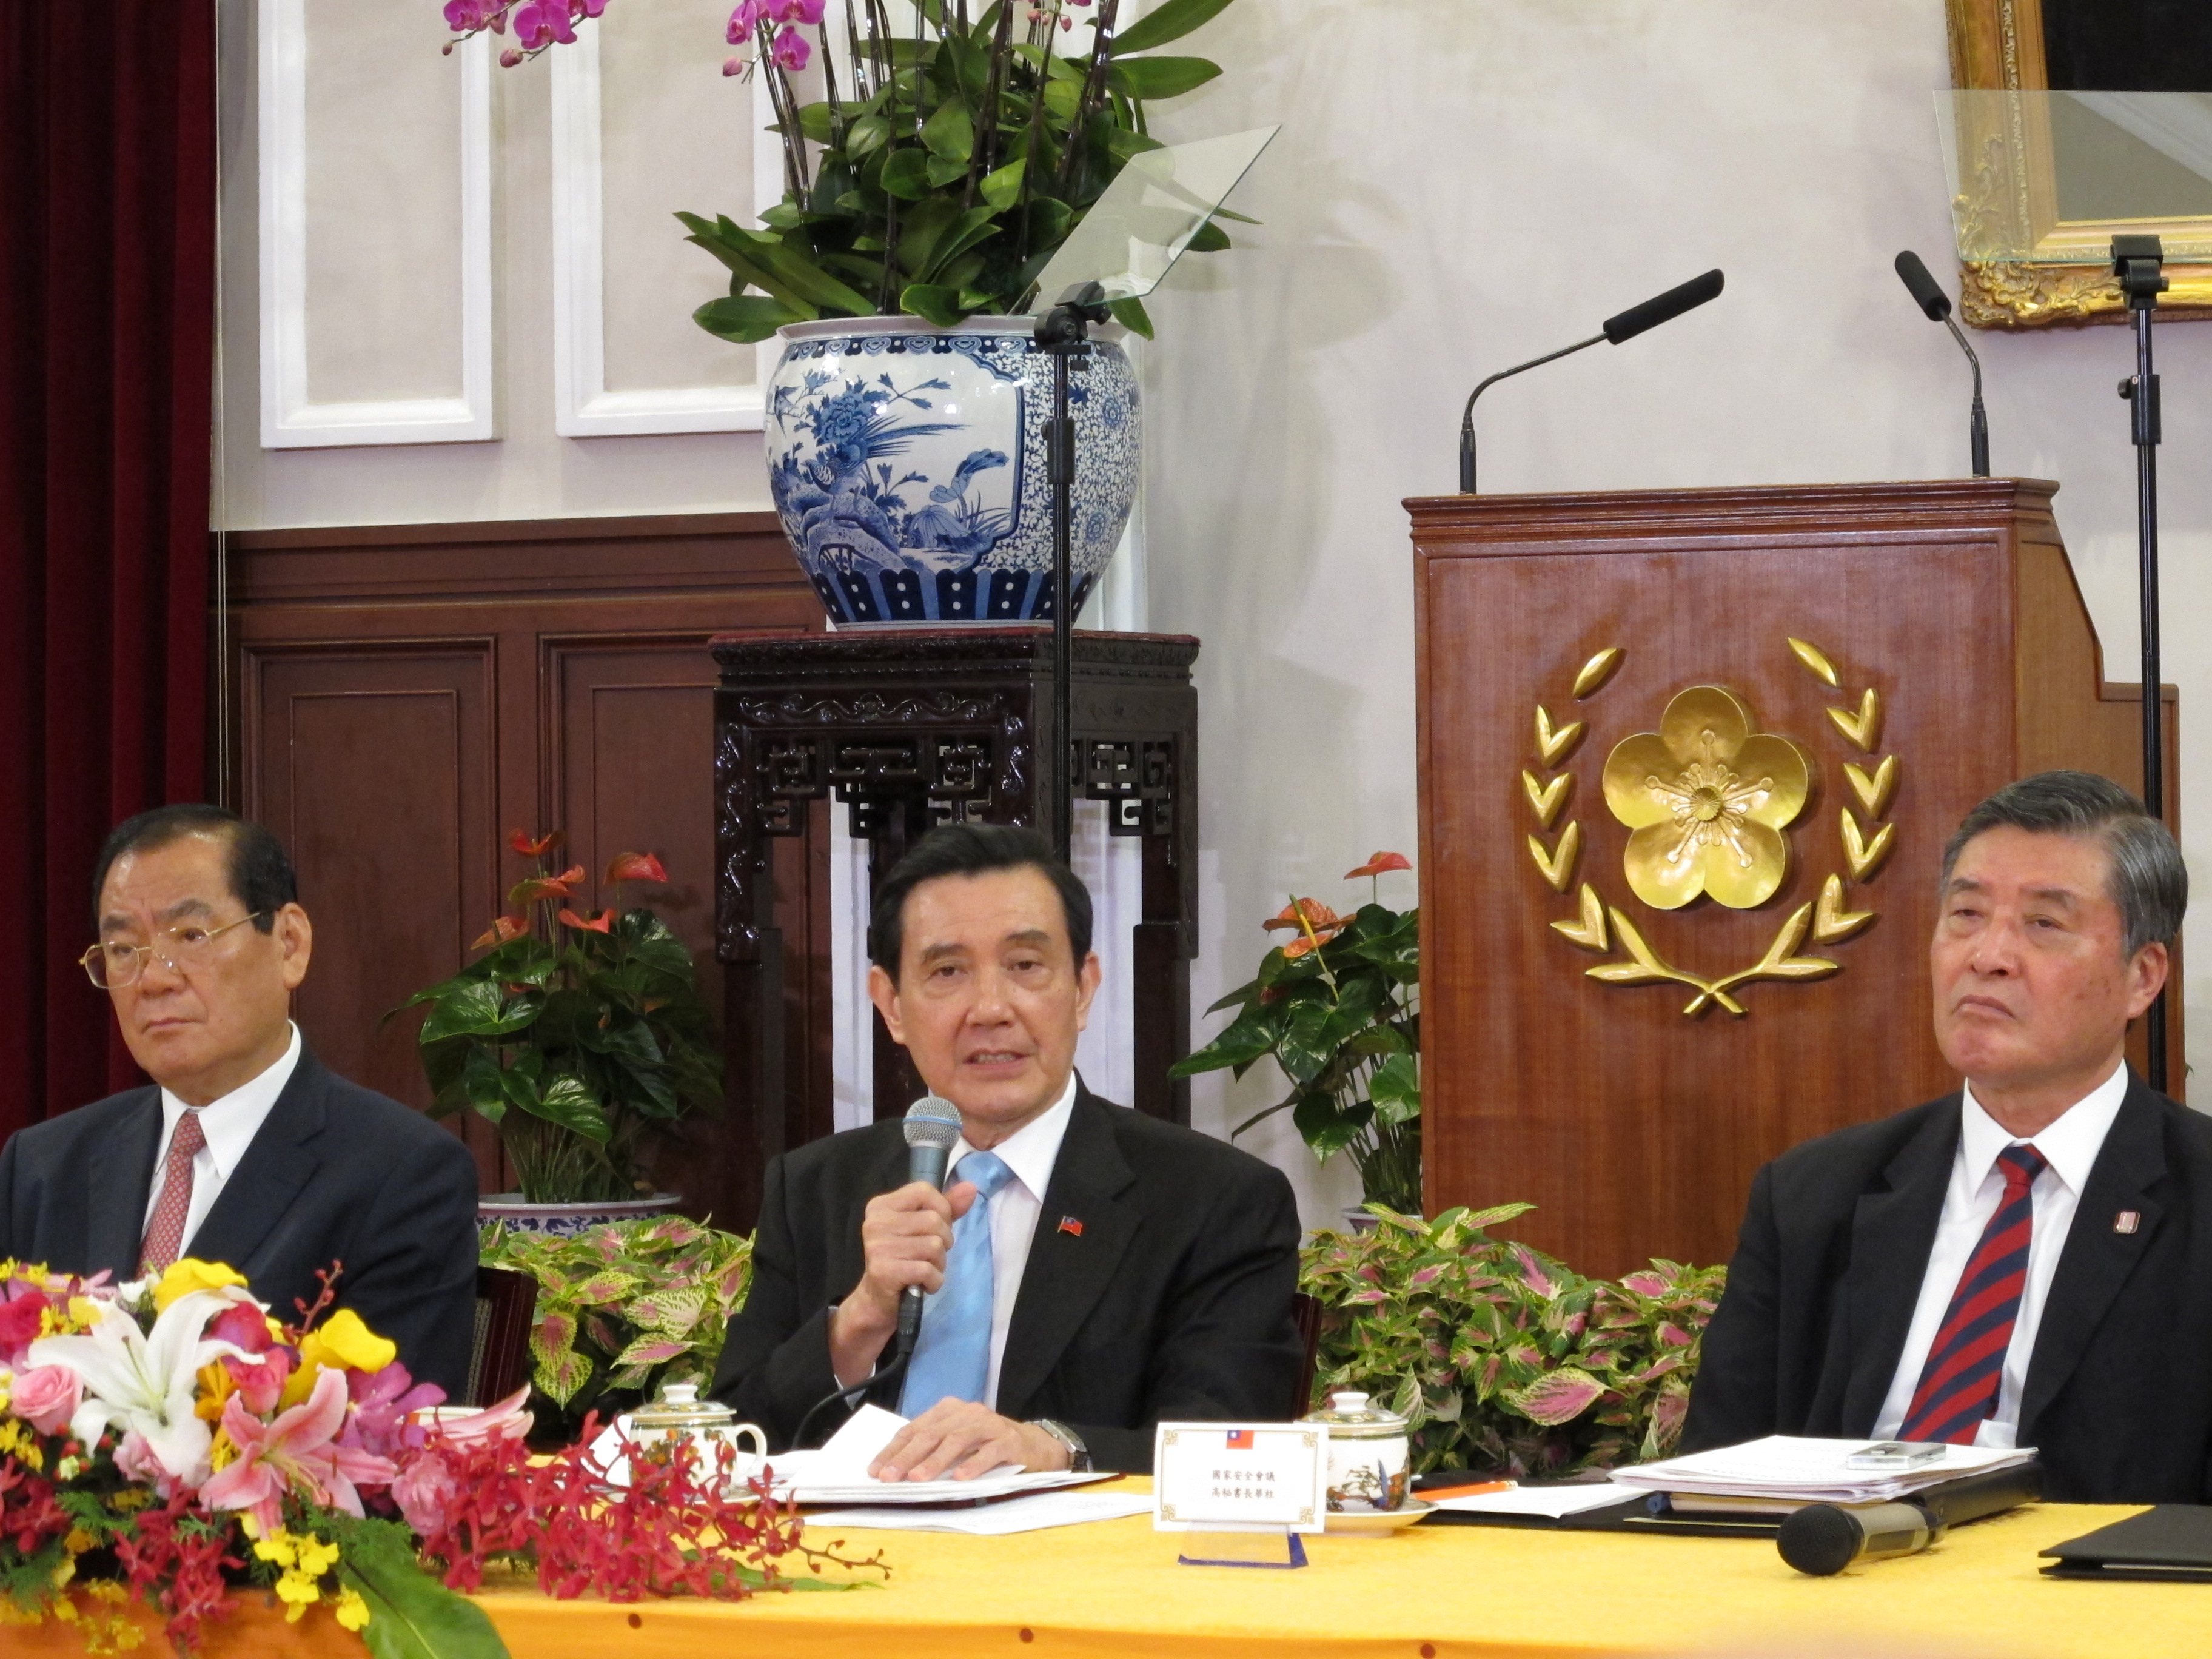 Taiwan President Ma Ying-jeou (centre) tells a press conference he hopes his November 7 summit with Chinese President Xi Jinping in Singapore will further develop ties between the two sides. Photo: Kyodo